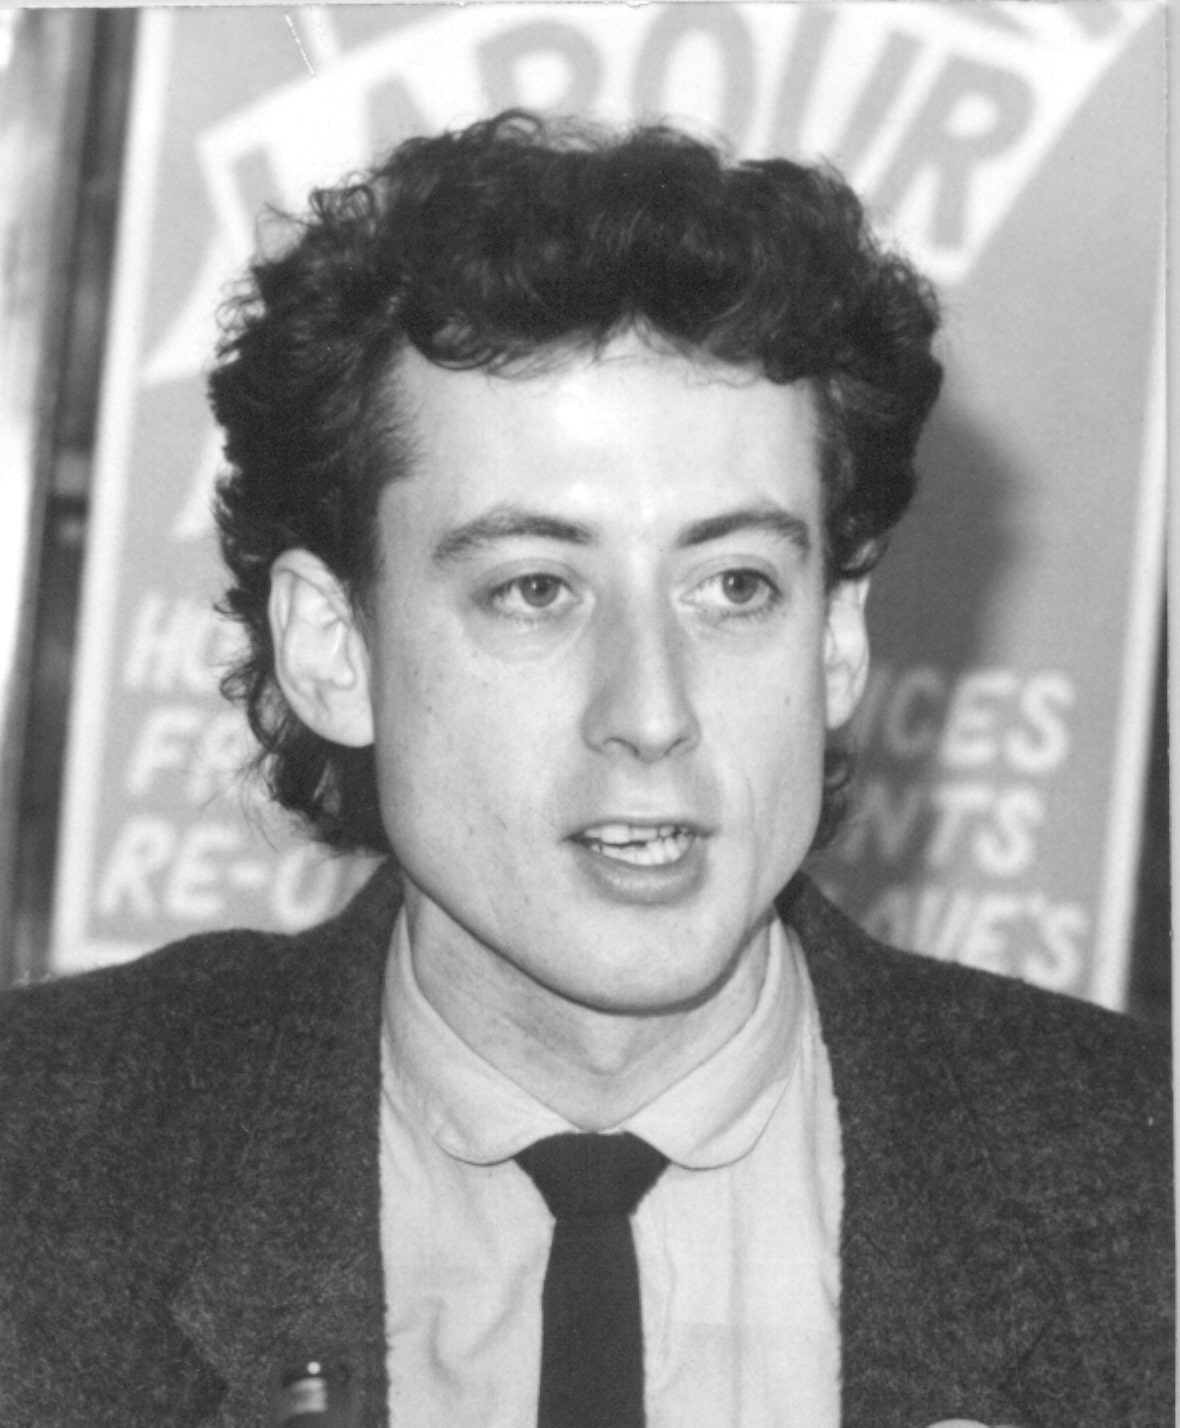 Peter Tatchell during his ill-fated campaign in the Bermondsey by-election. 